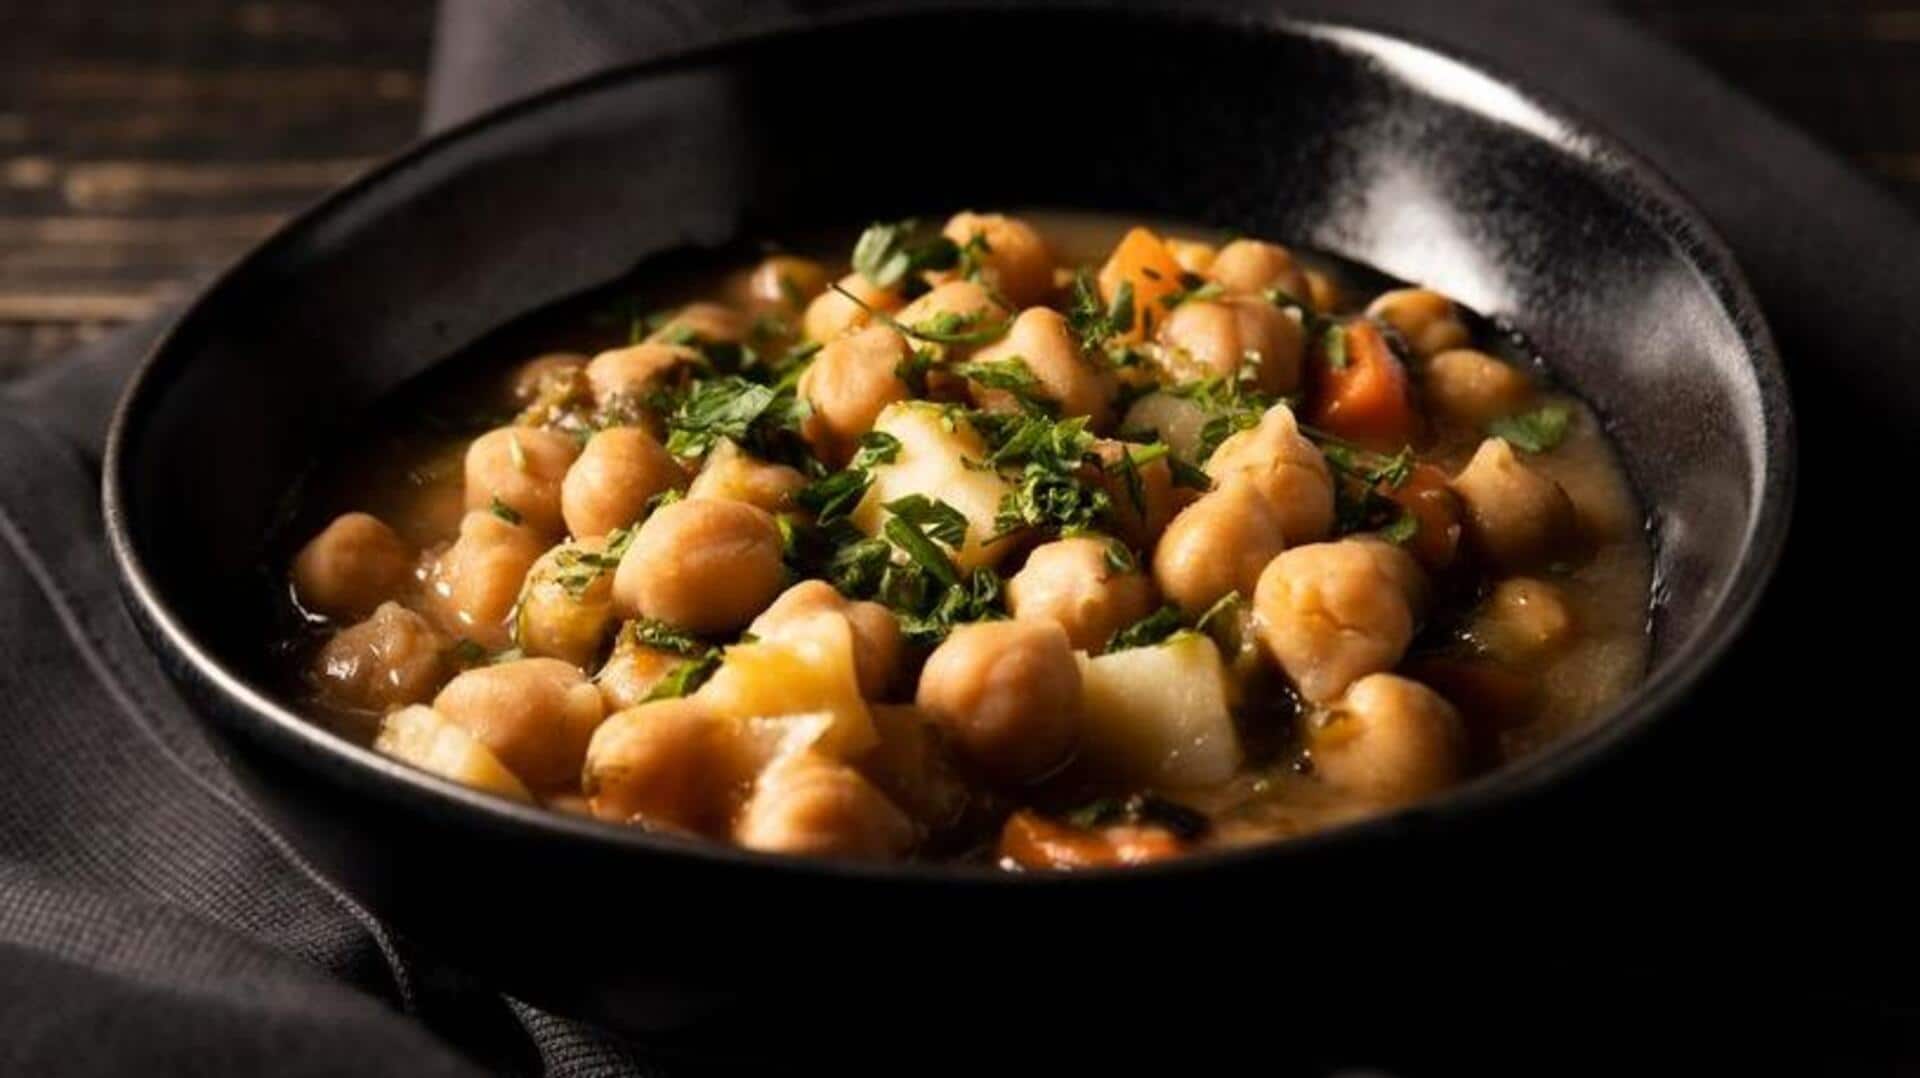 Recipe: Cook this delectable Moroccan chickpea stew at home